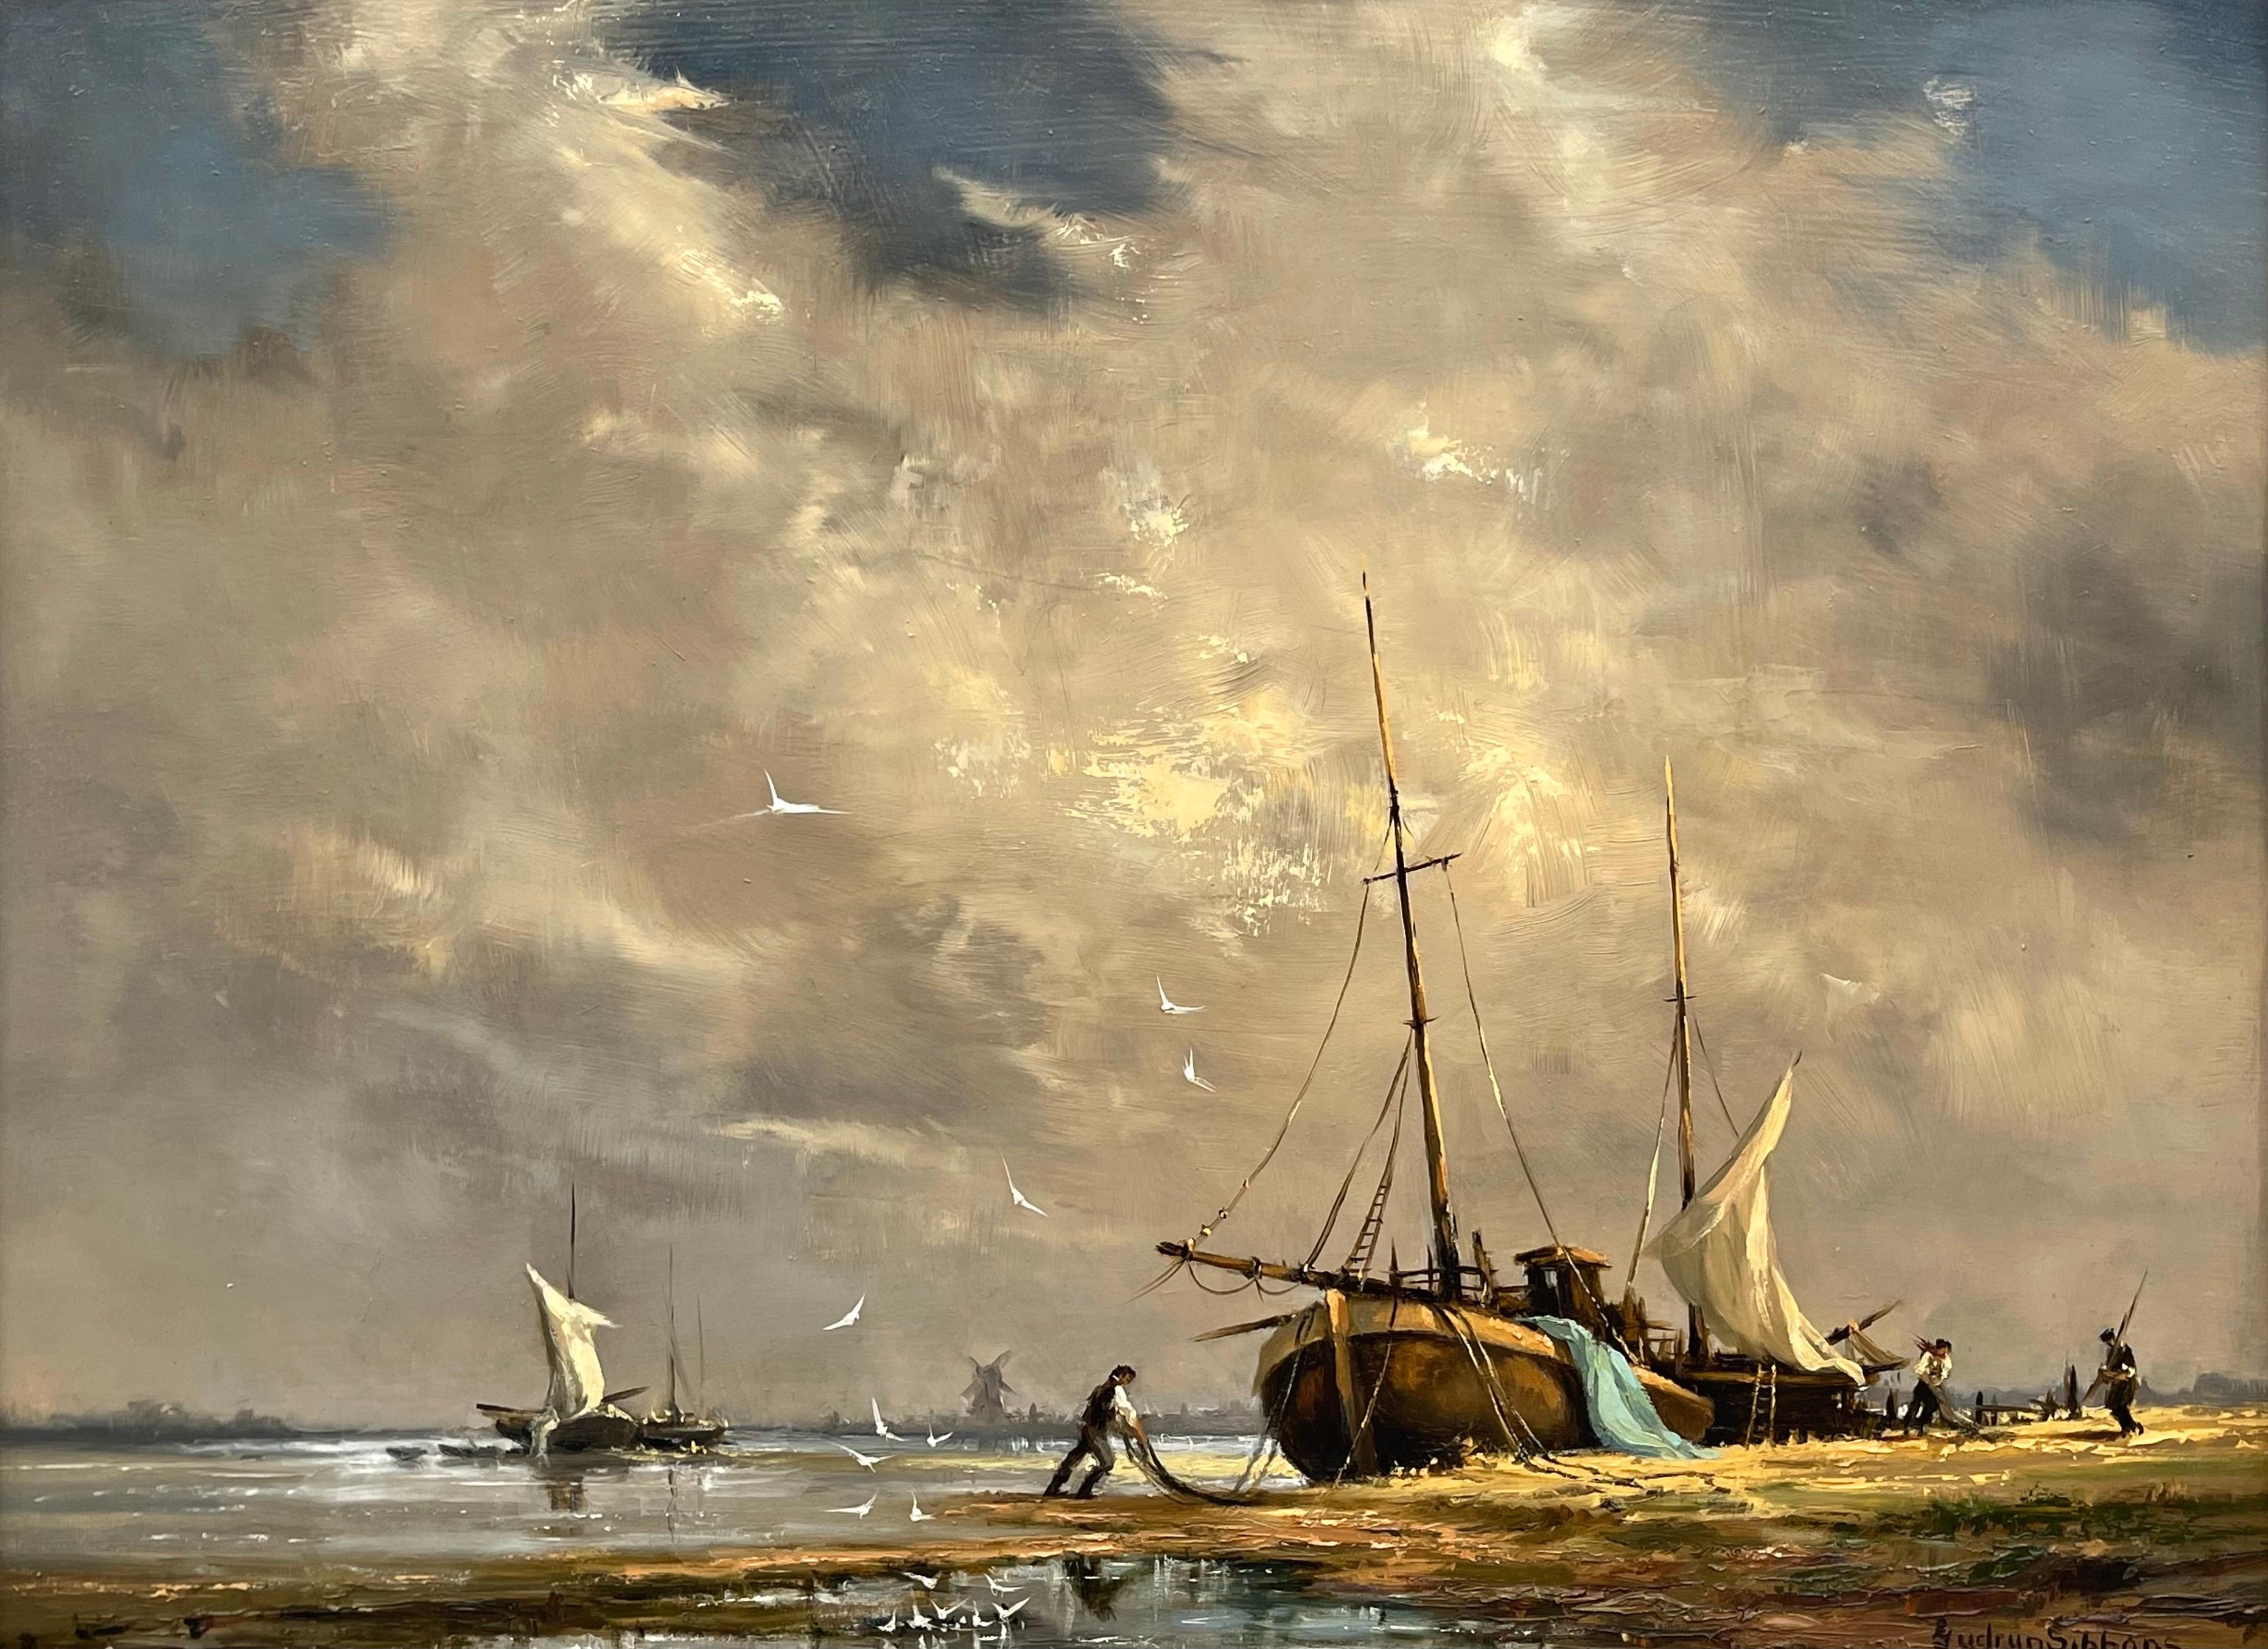 Oil Painting of Estuary Scene with Fishing Boat & Figures by British Artist - Brown Landscape Painting by Gudrun Sibbons